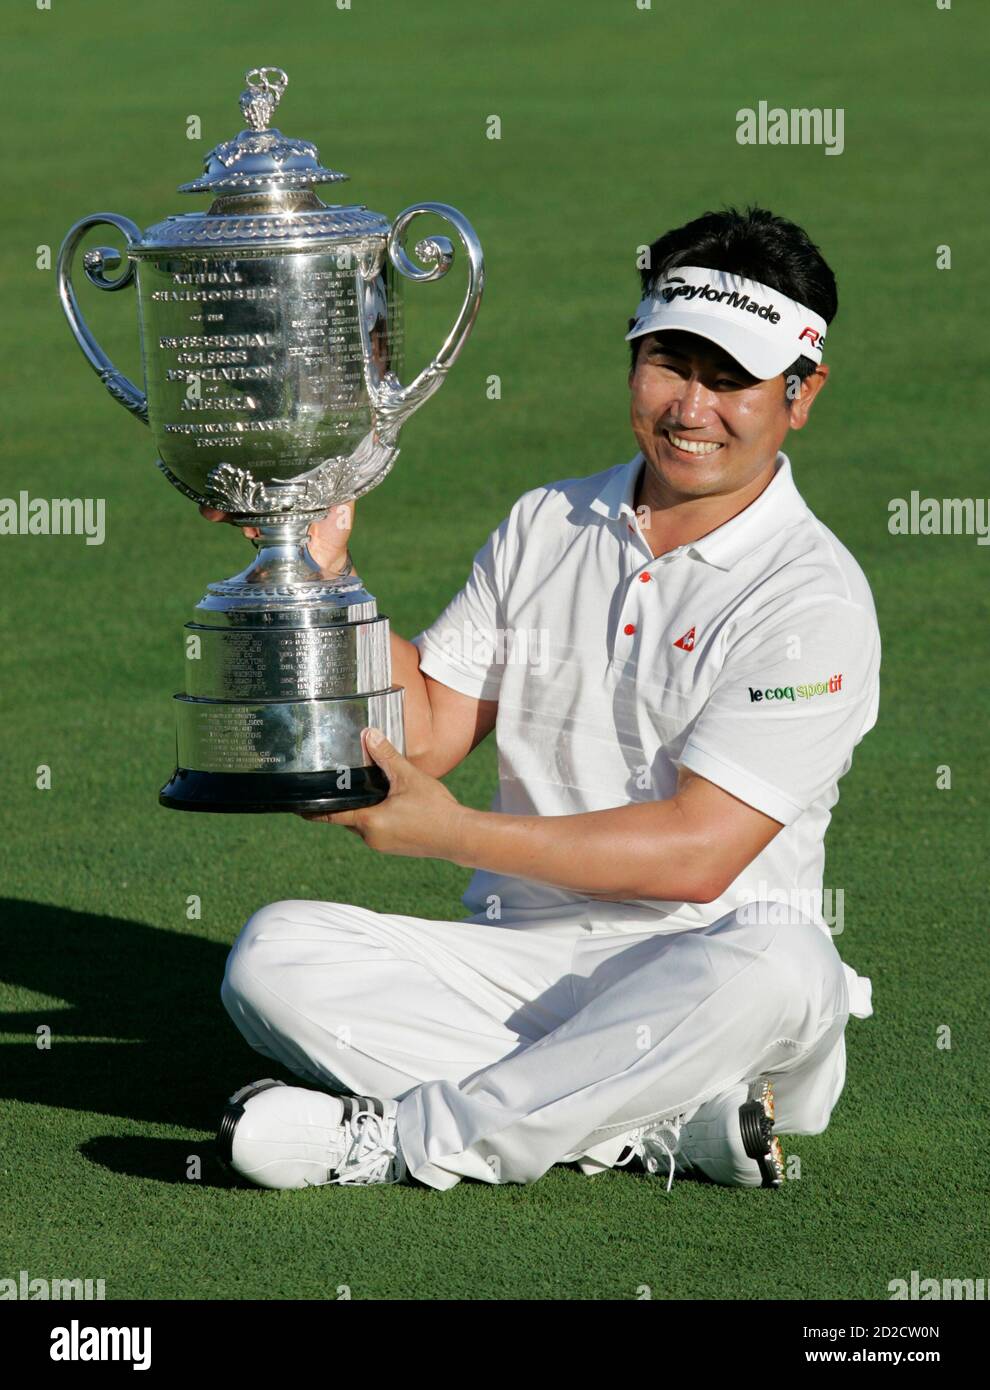 Yang Yong-eun of South Korea poses with the Wanamaker trophy after winning  the 2009 PGA Championship golf tournament at Hazeltine National Golf Club  in Chaska, Minnesota August 16, 2009. REUTERS/Andy King (UNITED